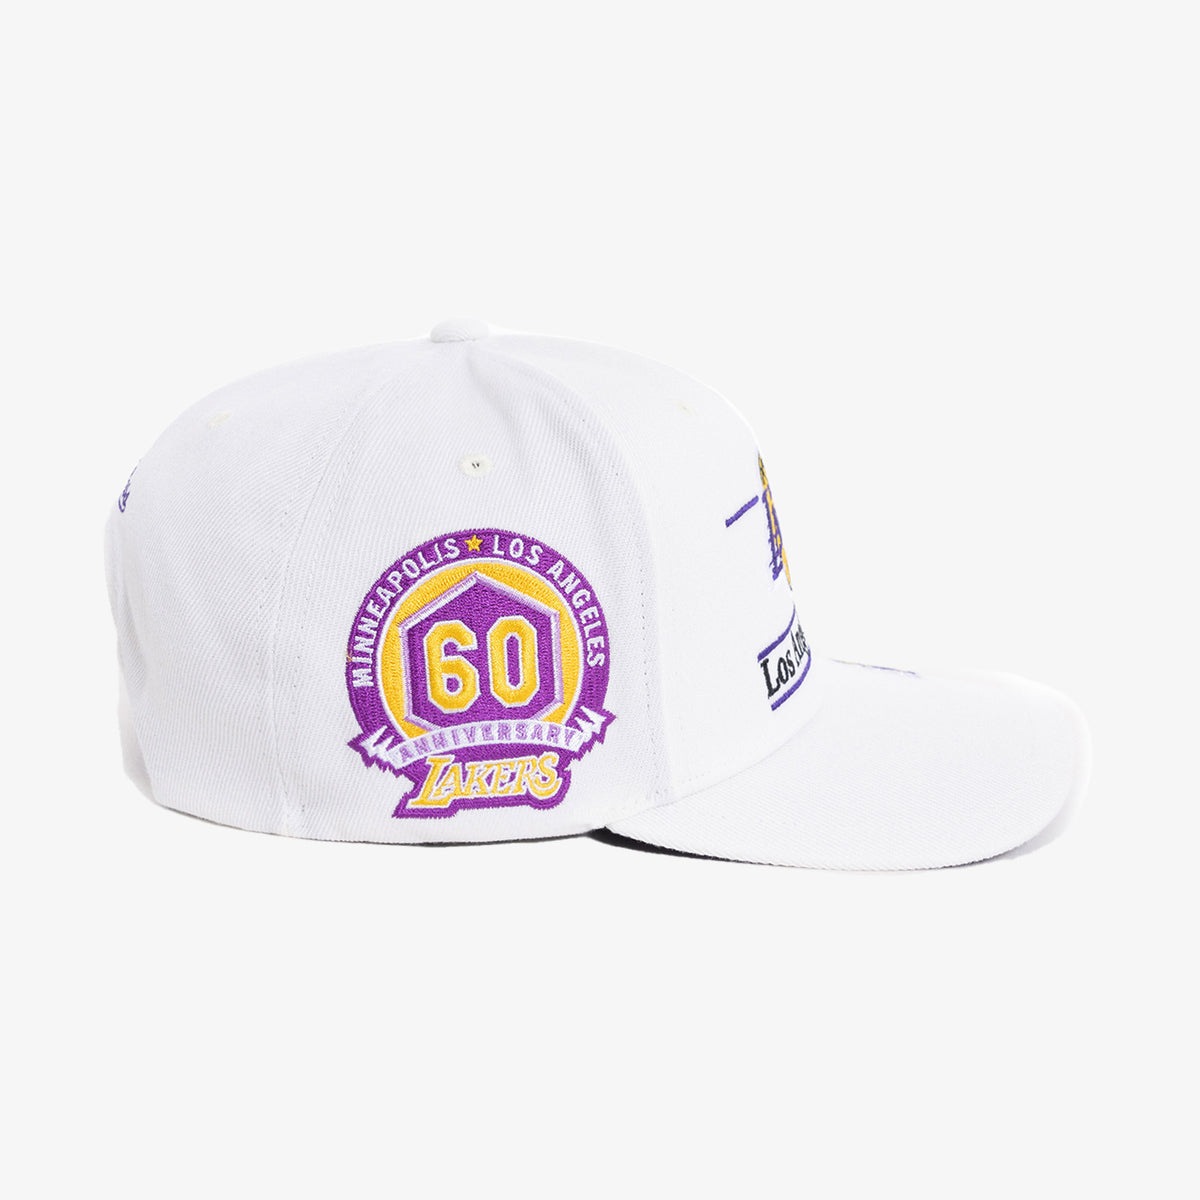 Los Angeles Lakers Show Up Classic Redline Snapback - Off White